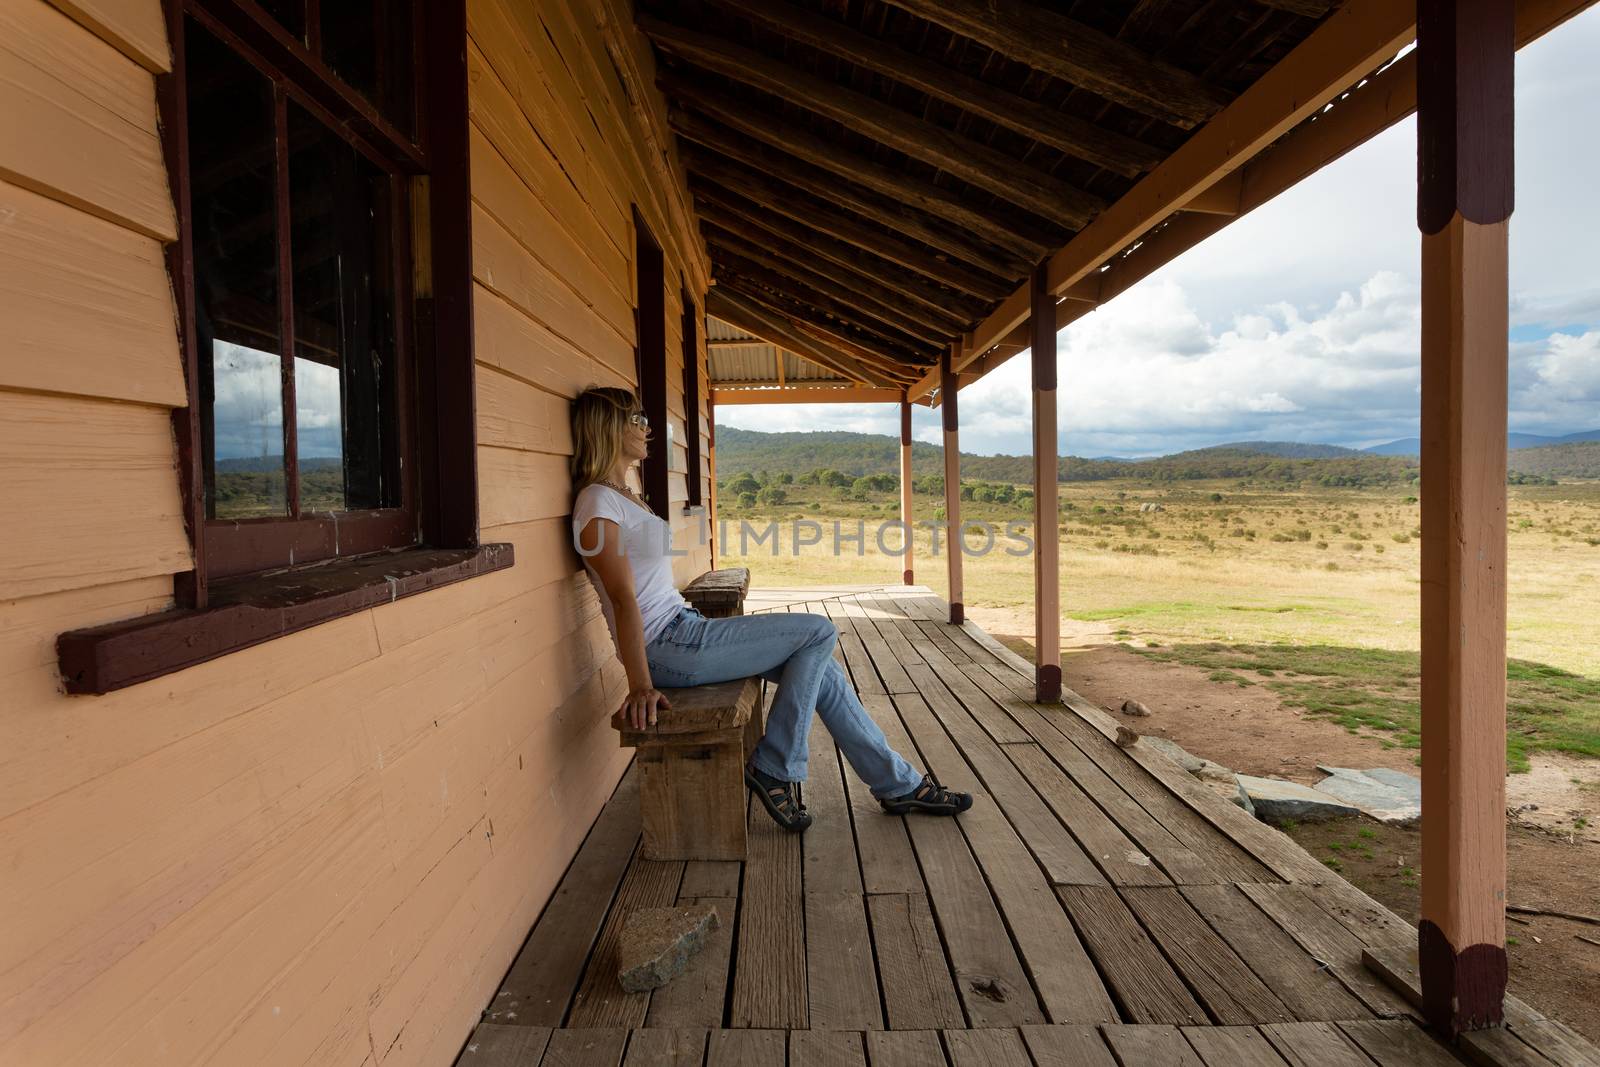 Woman relaxing on the rustic timber bench on the timber plank verandah of rural homestead in the beautiful Snowy High Plains Kosciuszko. A storm is brewing in the late afternoon. Rural lifestyle